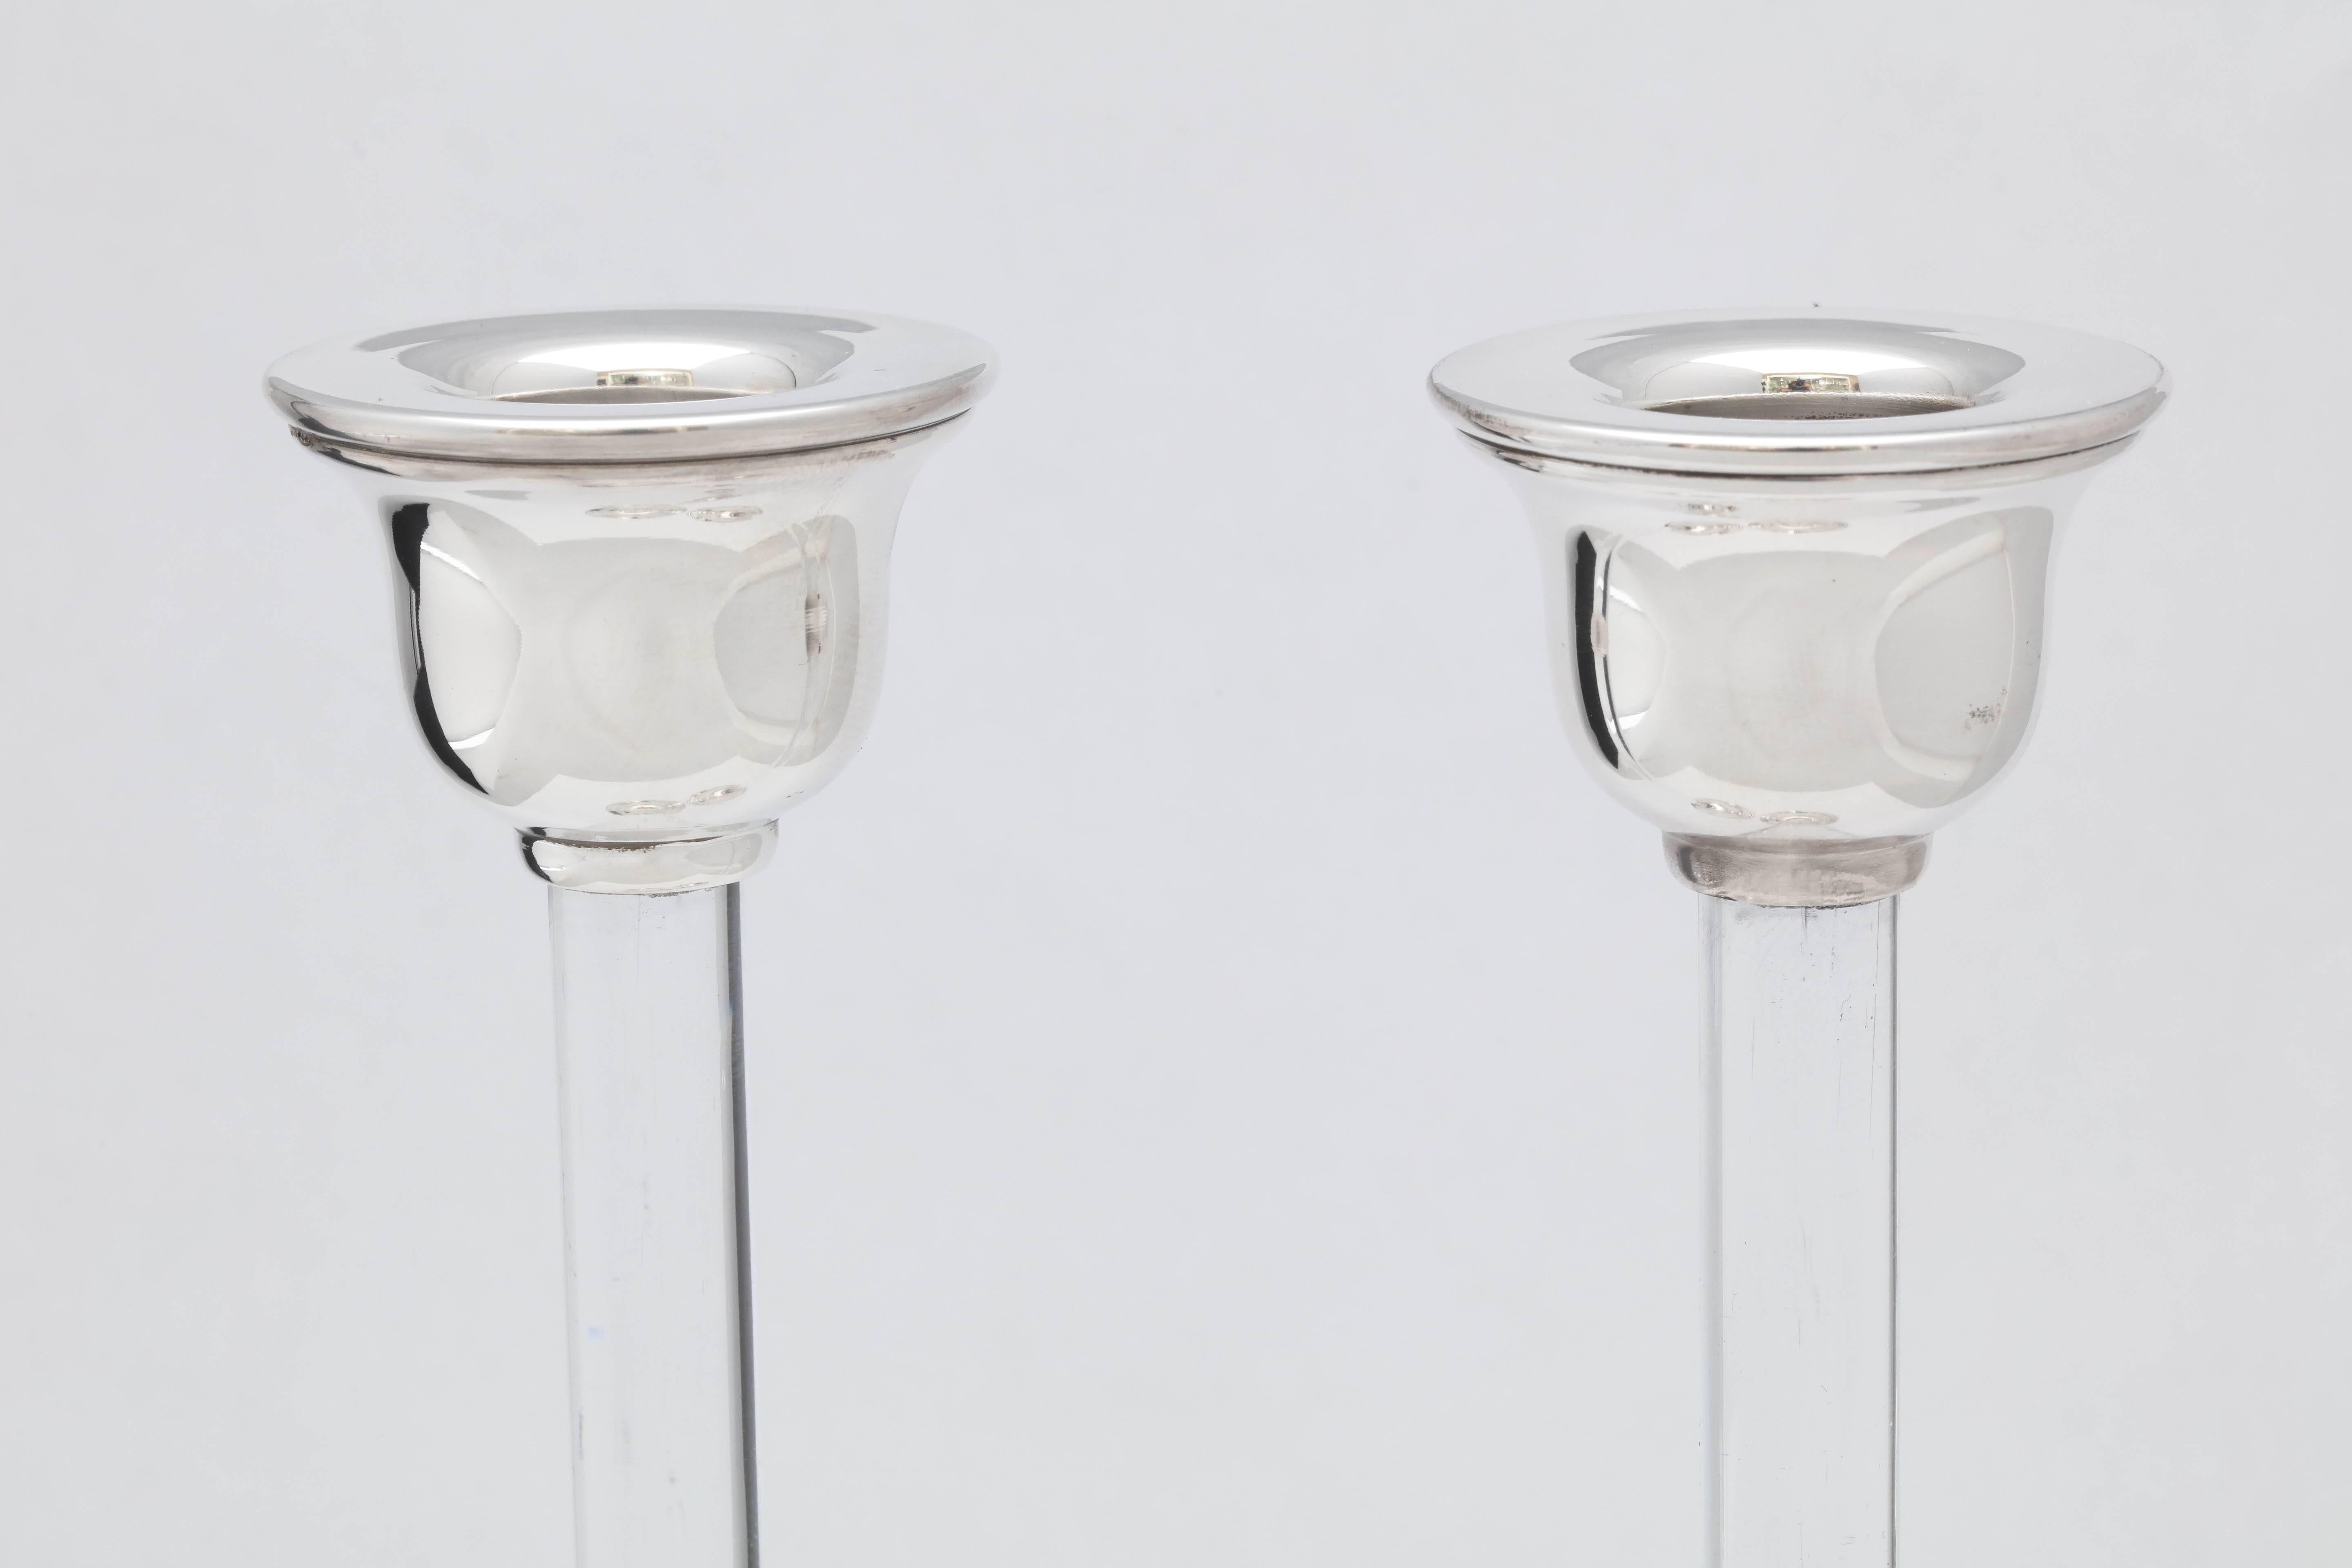 Pair of sterling Mid-Century Modern, sterling silver-mounted crystal candlesticks, European, circa 1950s-1960s. Each is 8 inches high x 2 1/2 inches diameter across base x 1 3/4 inches diameter across candle cup. Weighted. Lovely bell-shaped